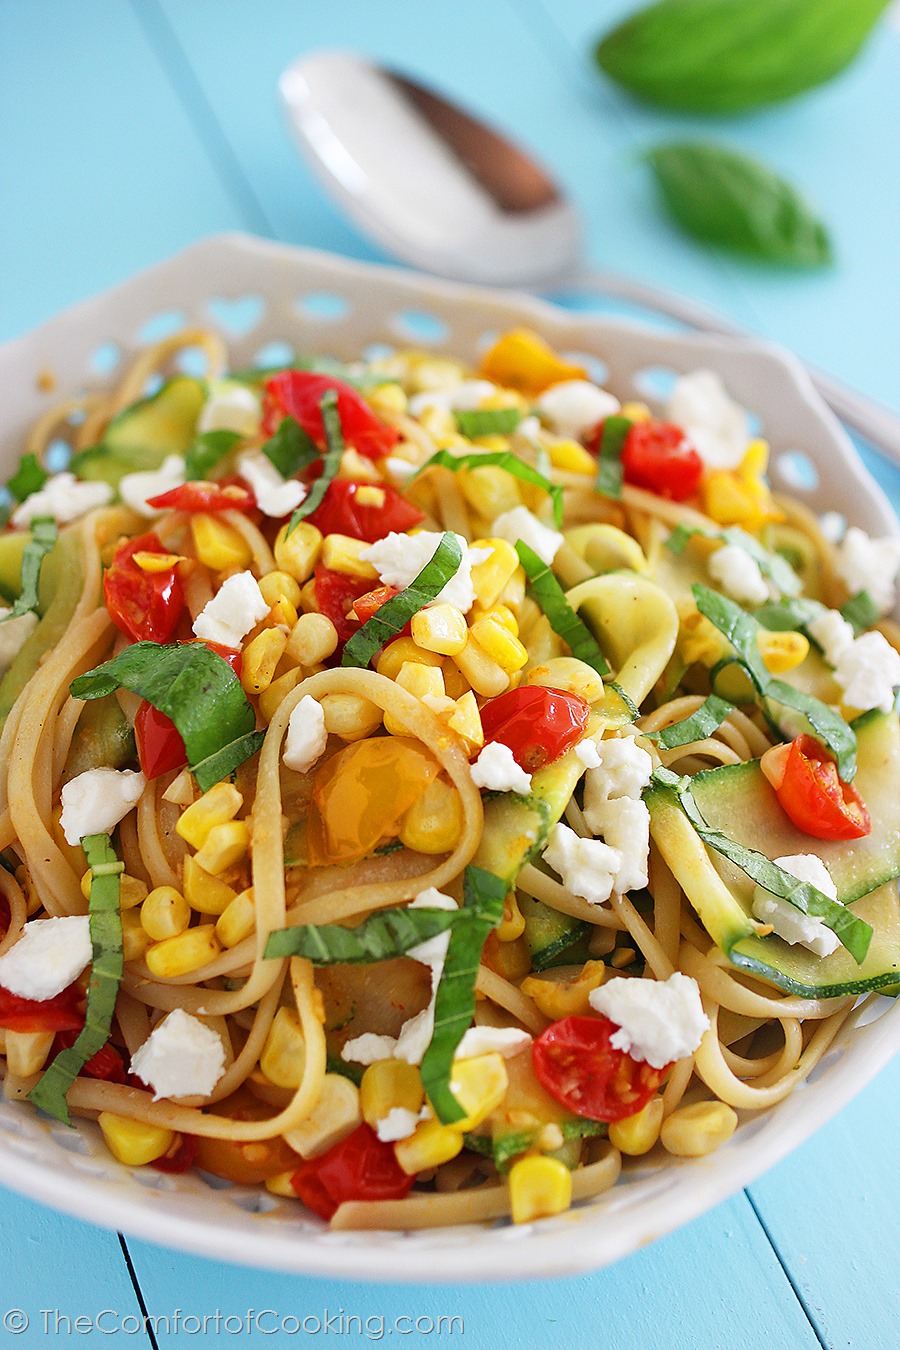 Summer Vegetable Linguine with Feta – Twirl your fork around this simple, scrumptious linguine dish full of fresh summer veggies and creamy feta! | thecomfortofcooking.com